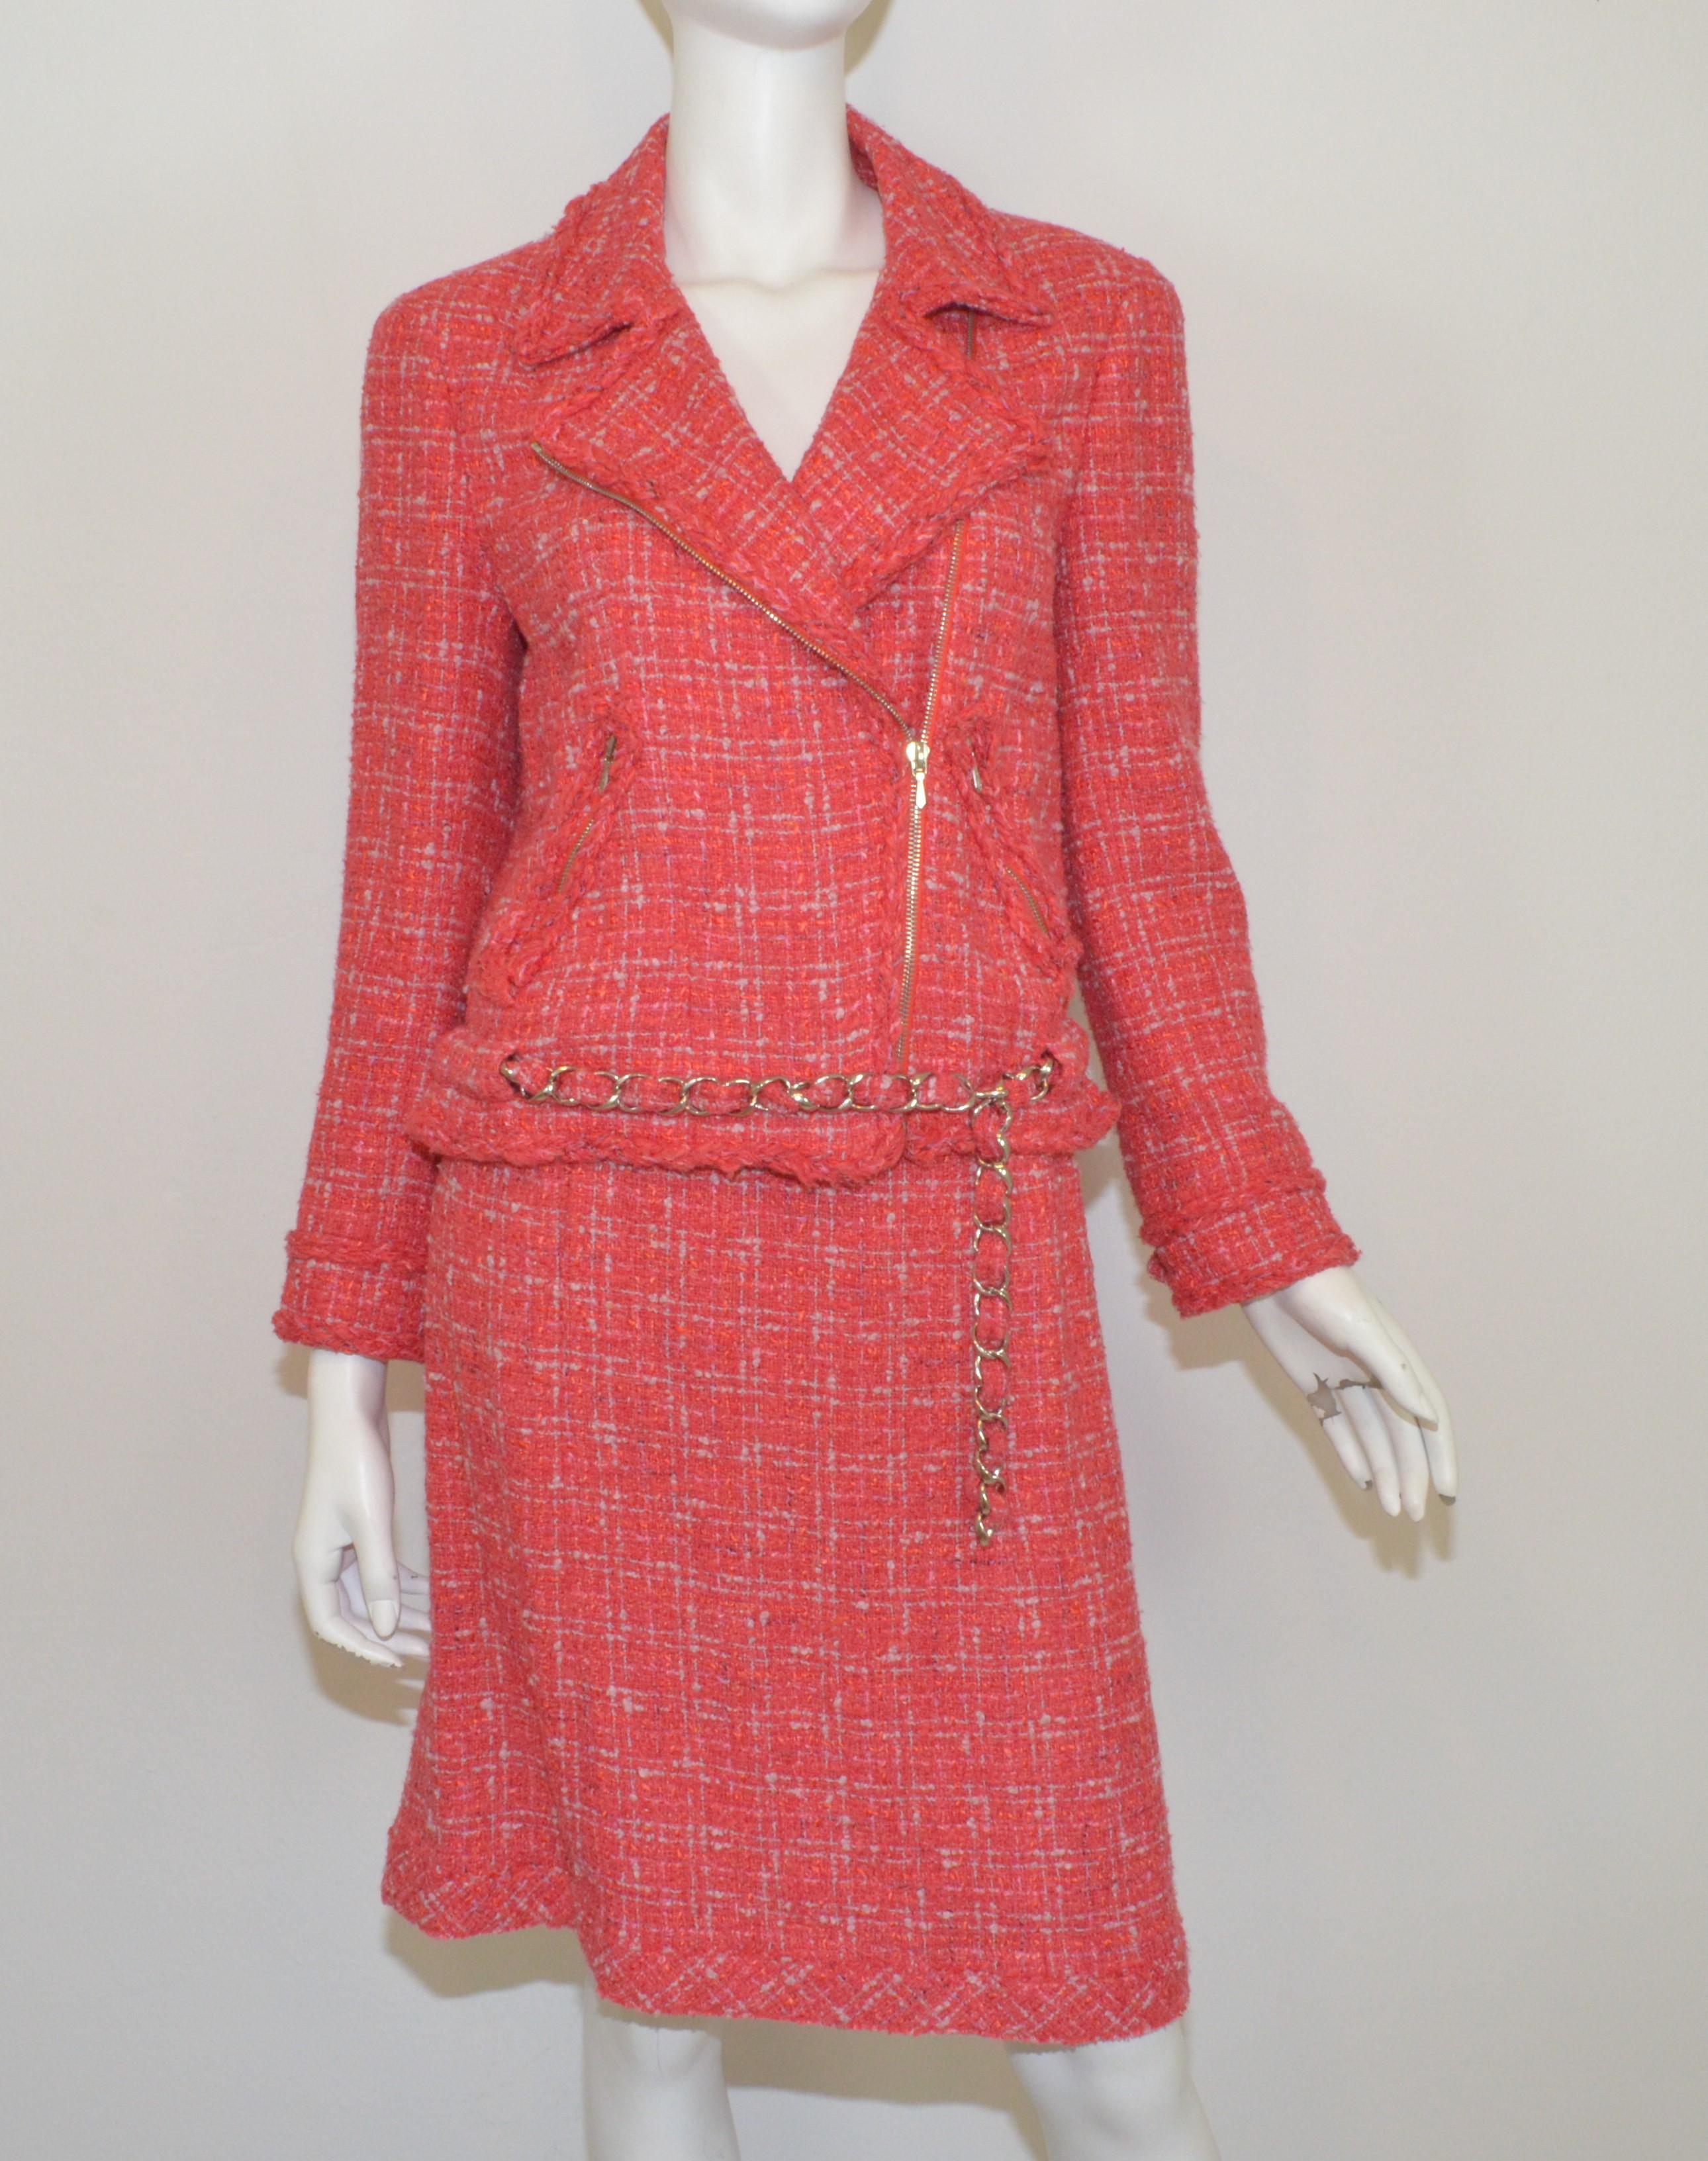 Chanel 2006 P collection Skirt Suit — Featured in a coral/red tweed with silver tone hardware throughout. Moto style jackets has a zipper fastening, zippered pockets, silver buttons at the cuffs of the sleeves, and an optional chain belt. Skirt has